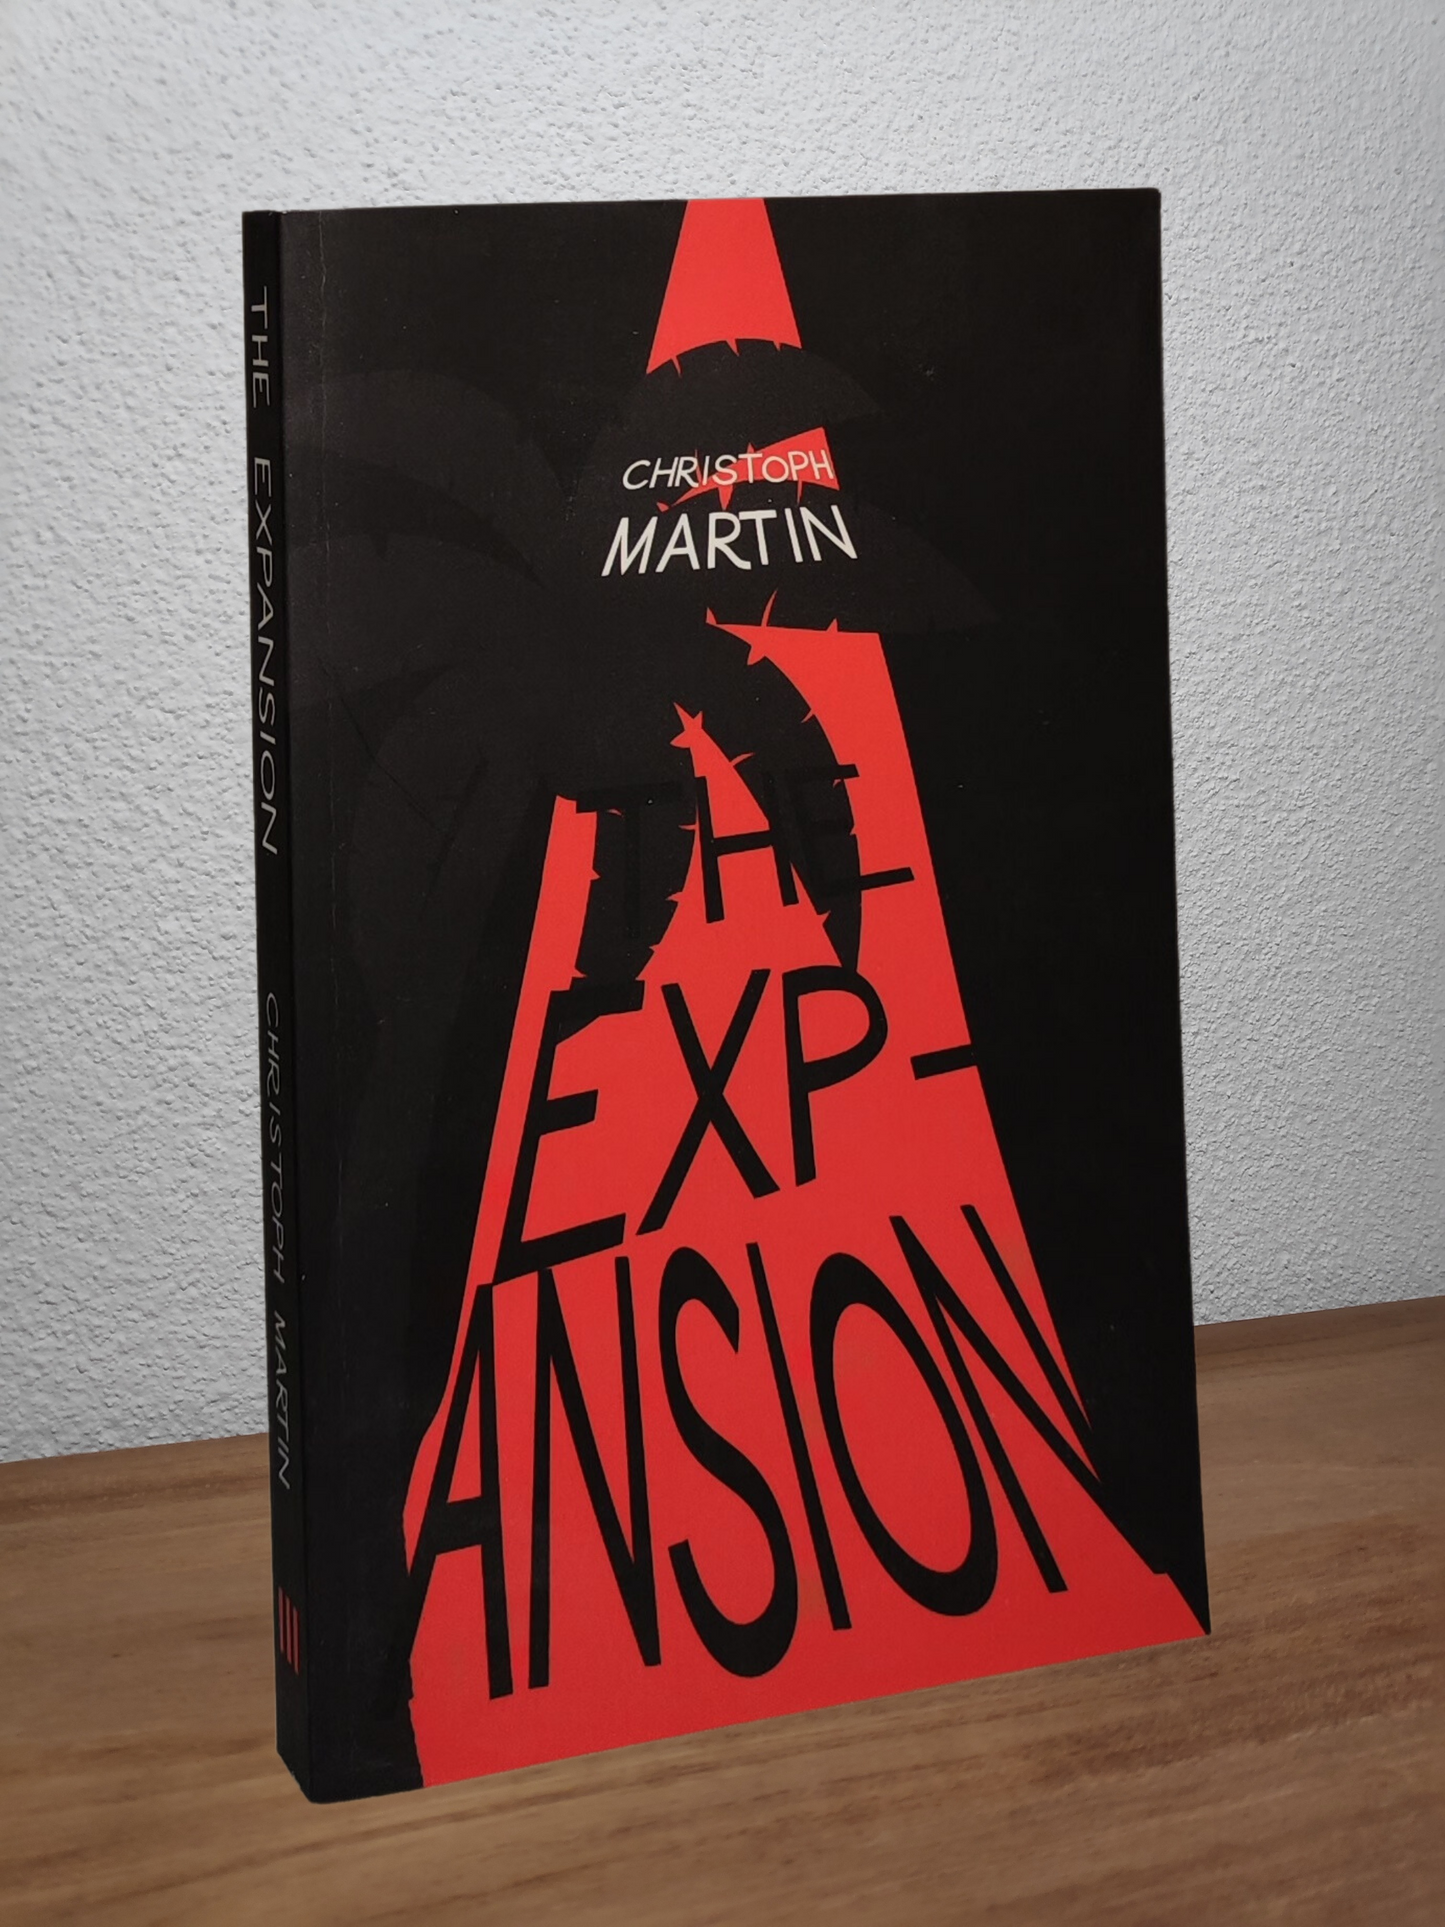 Christoph Martin - The Expansion  - Second-hand english book to deliver in Zurich & Switzerland